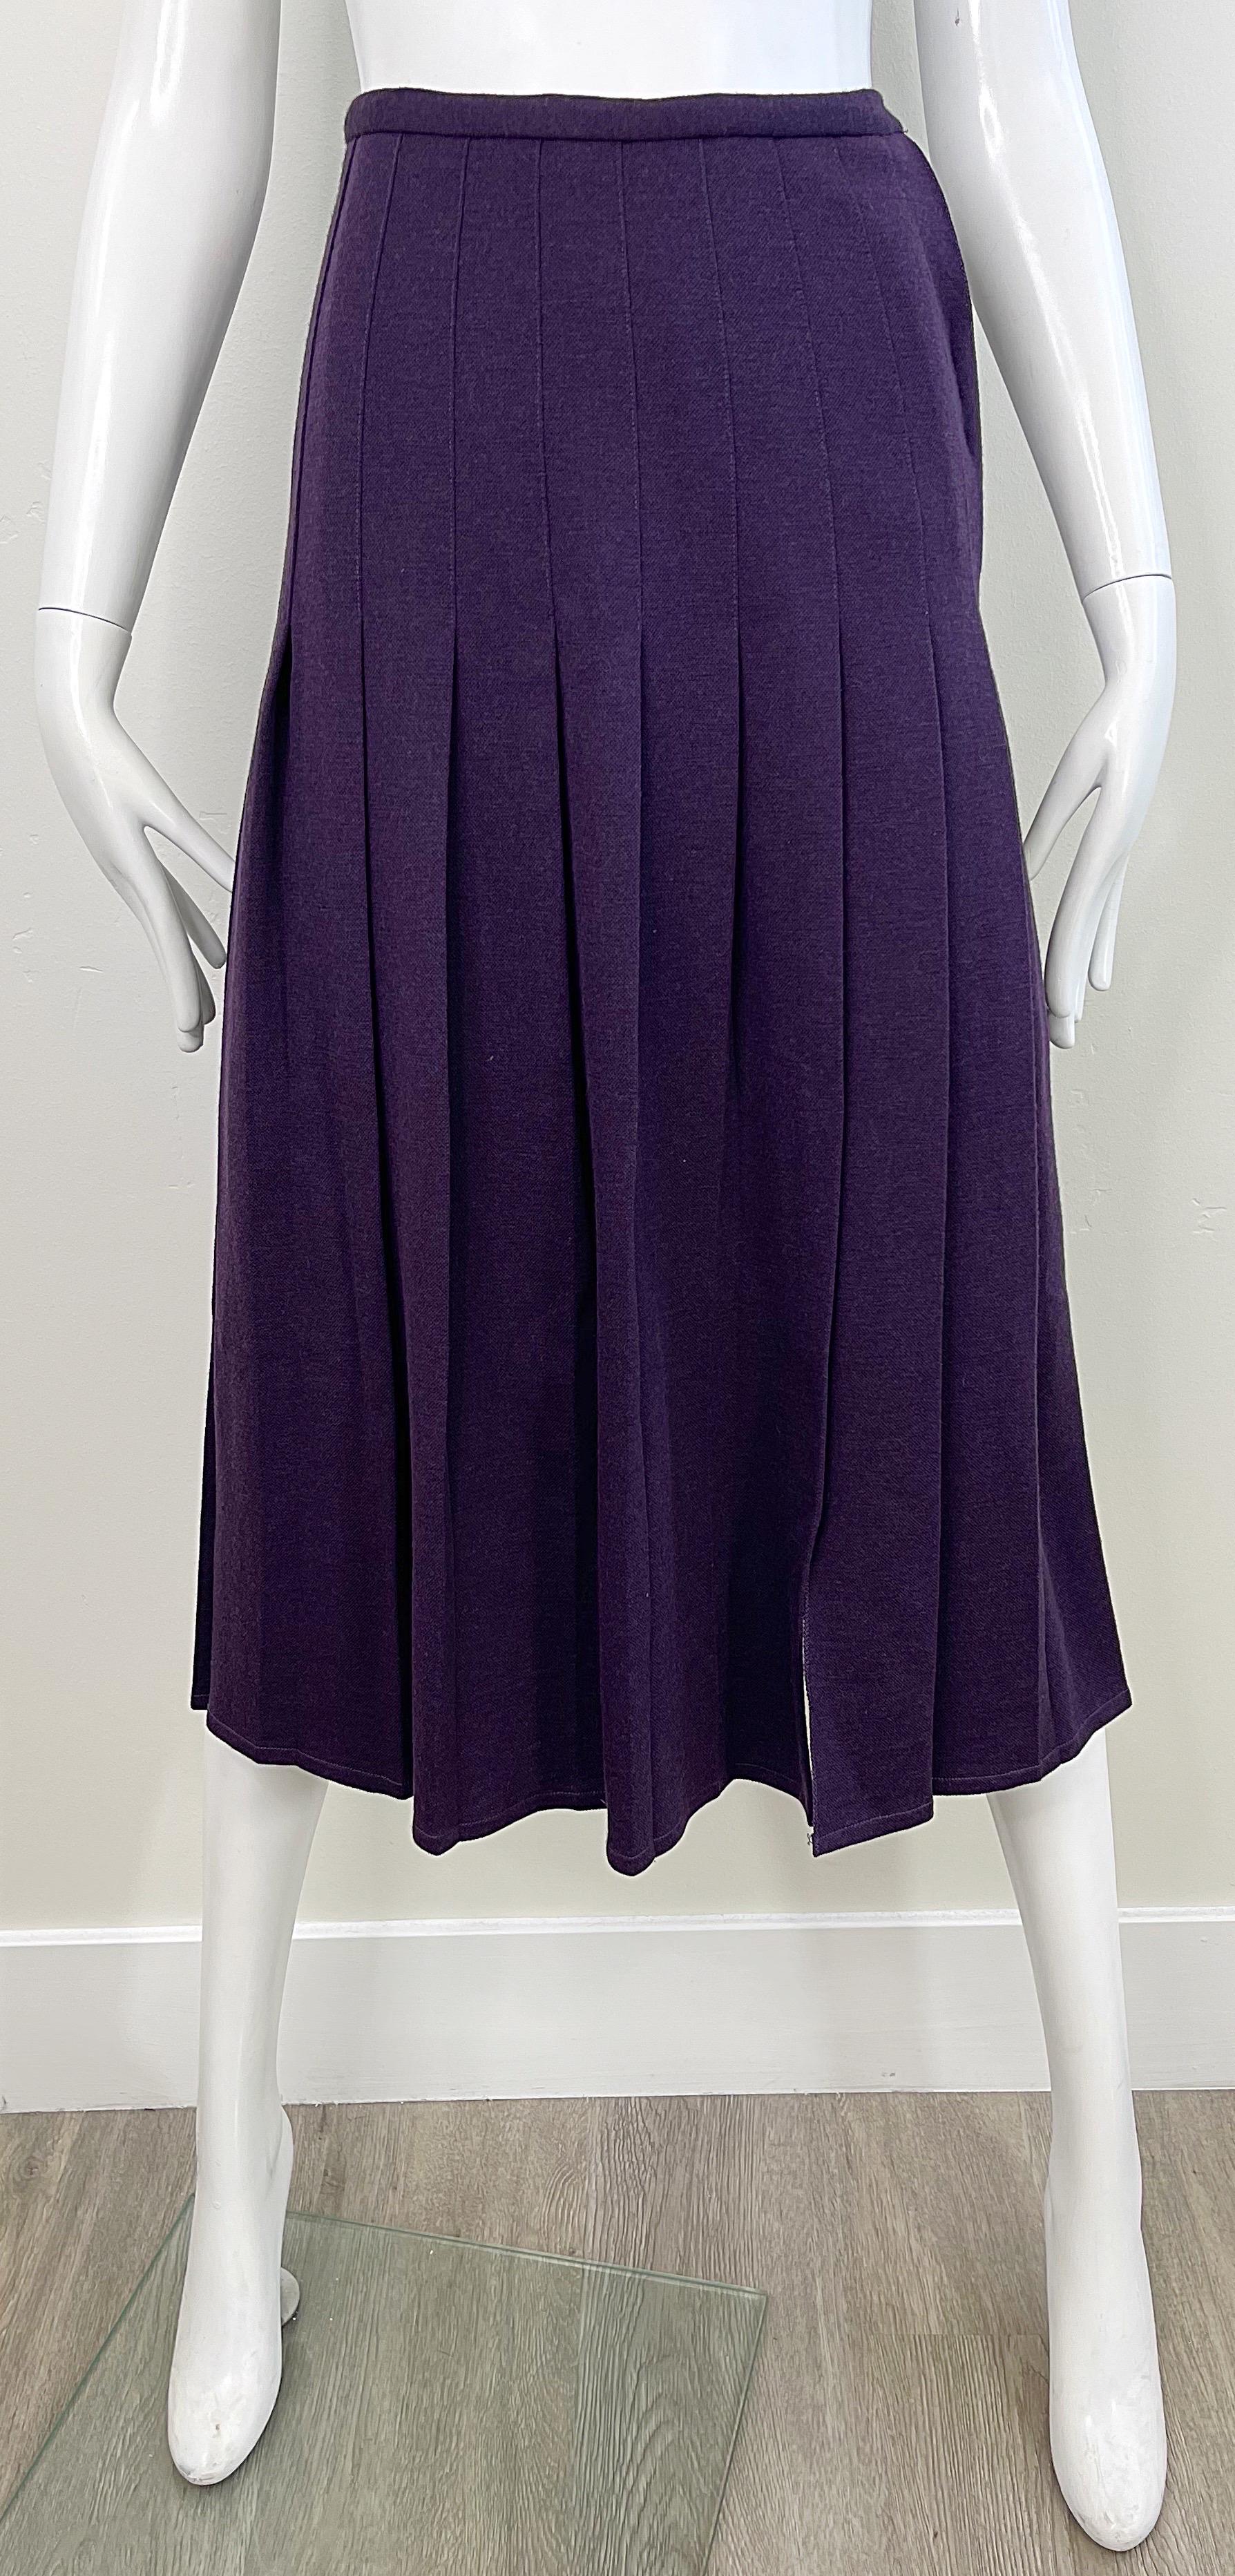 Chic late 70s SONIA RYKIEL dark purple / eggplant high waisted wool midi skirt ! Hidden zipper up the side with button / hook-and-eye closure. Can easily be dressed up or down. Pair with a blouse, t-shirt, crop top, etc. 
In great condition
Made in